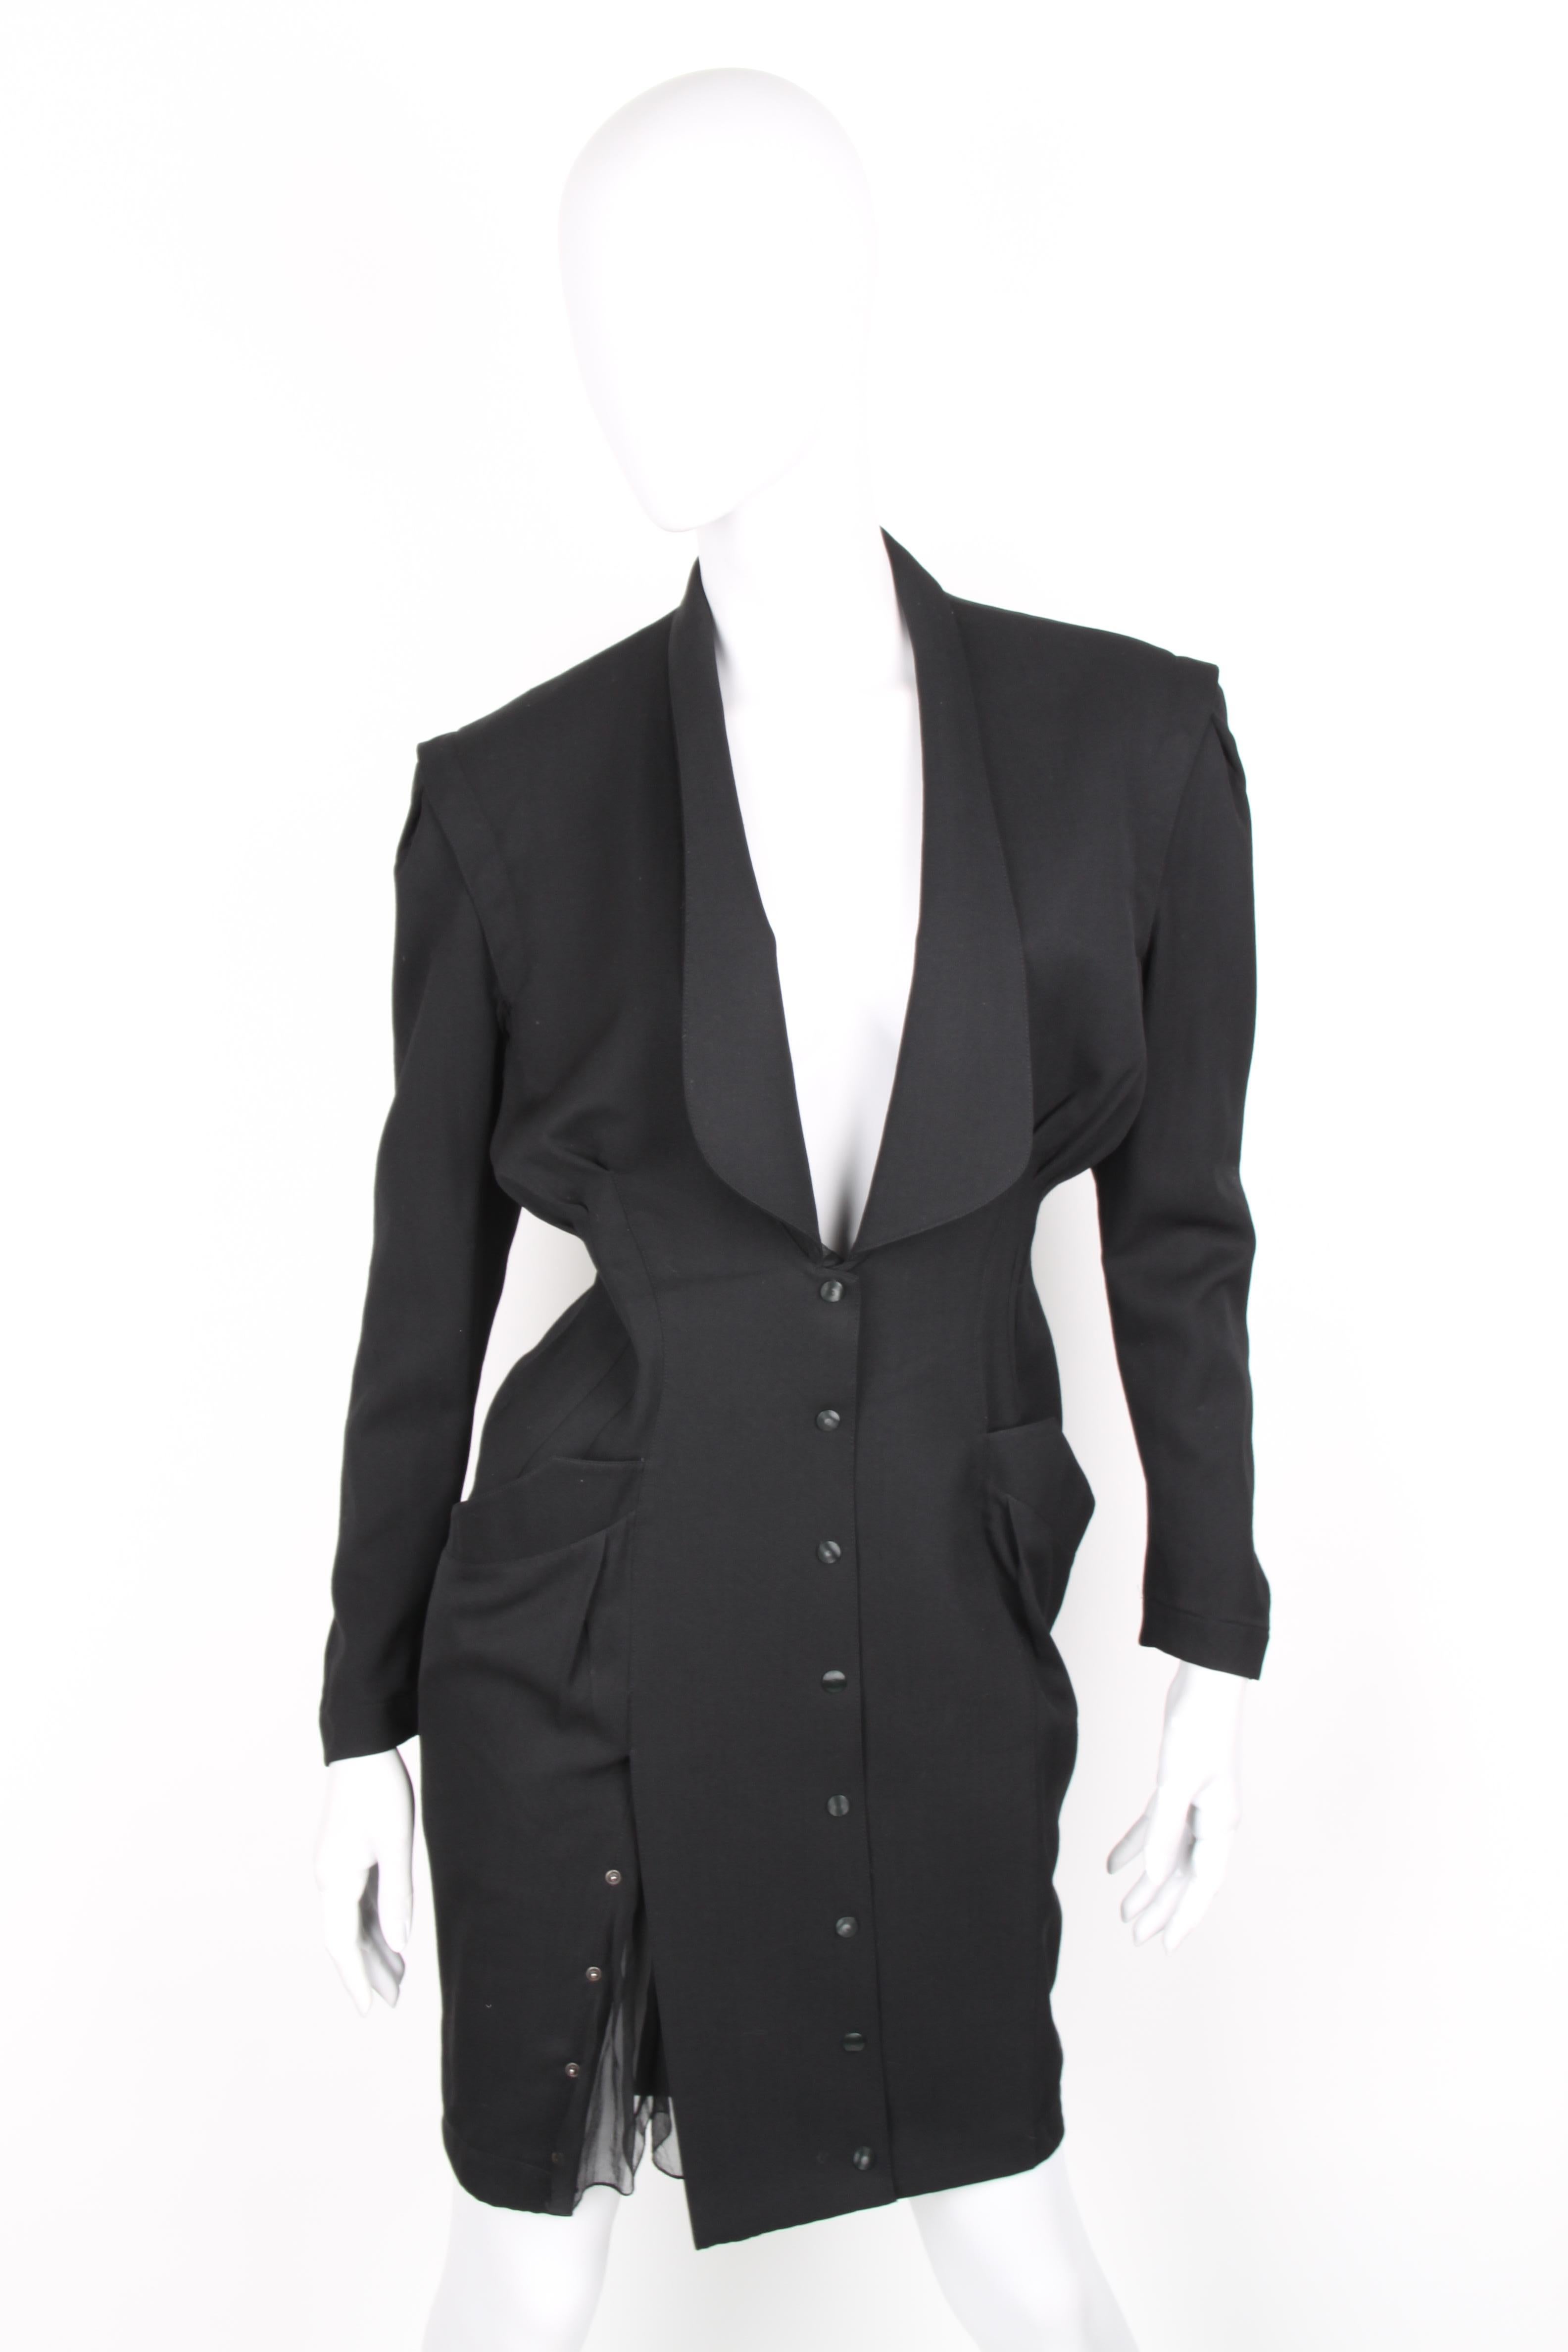 Thierry Mugler Black Knee Length Detachable Sleeves Dress.

Black knee length dress with open pockets from Thierry Mugler: single breasted jacket with shawl collar detail. 8 snap closures on the front. Reveals a chiffon short sleeve once detachable